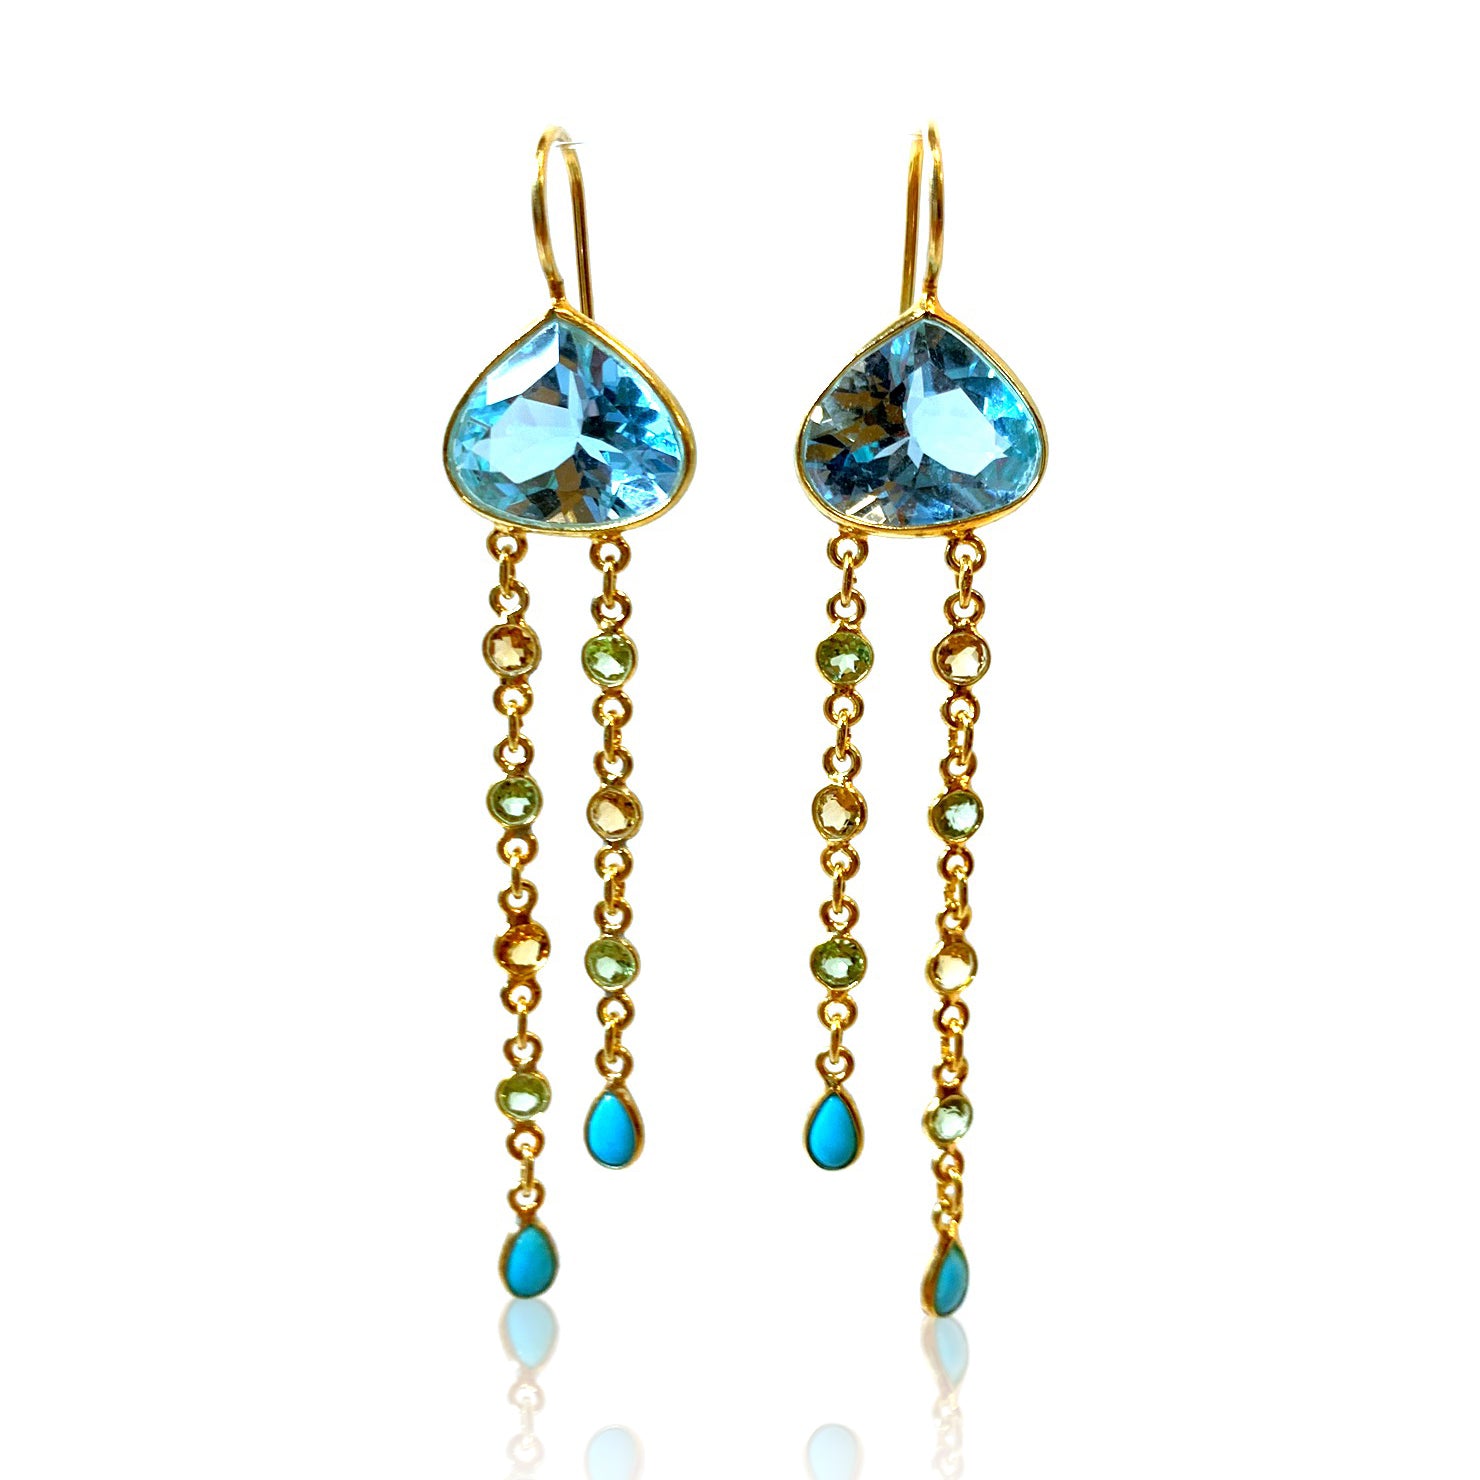 Blue Topaz Large Drop with Peridot, Citrine and Turquoise Dangles